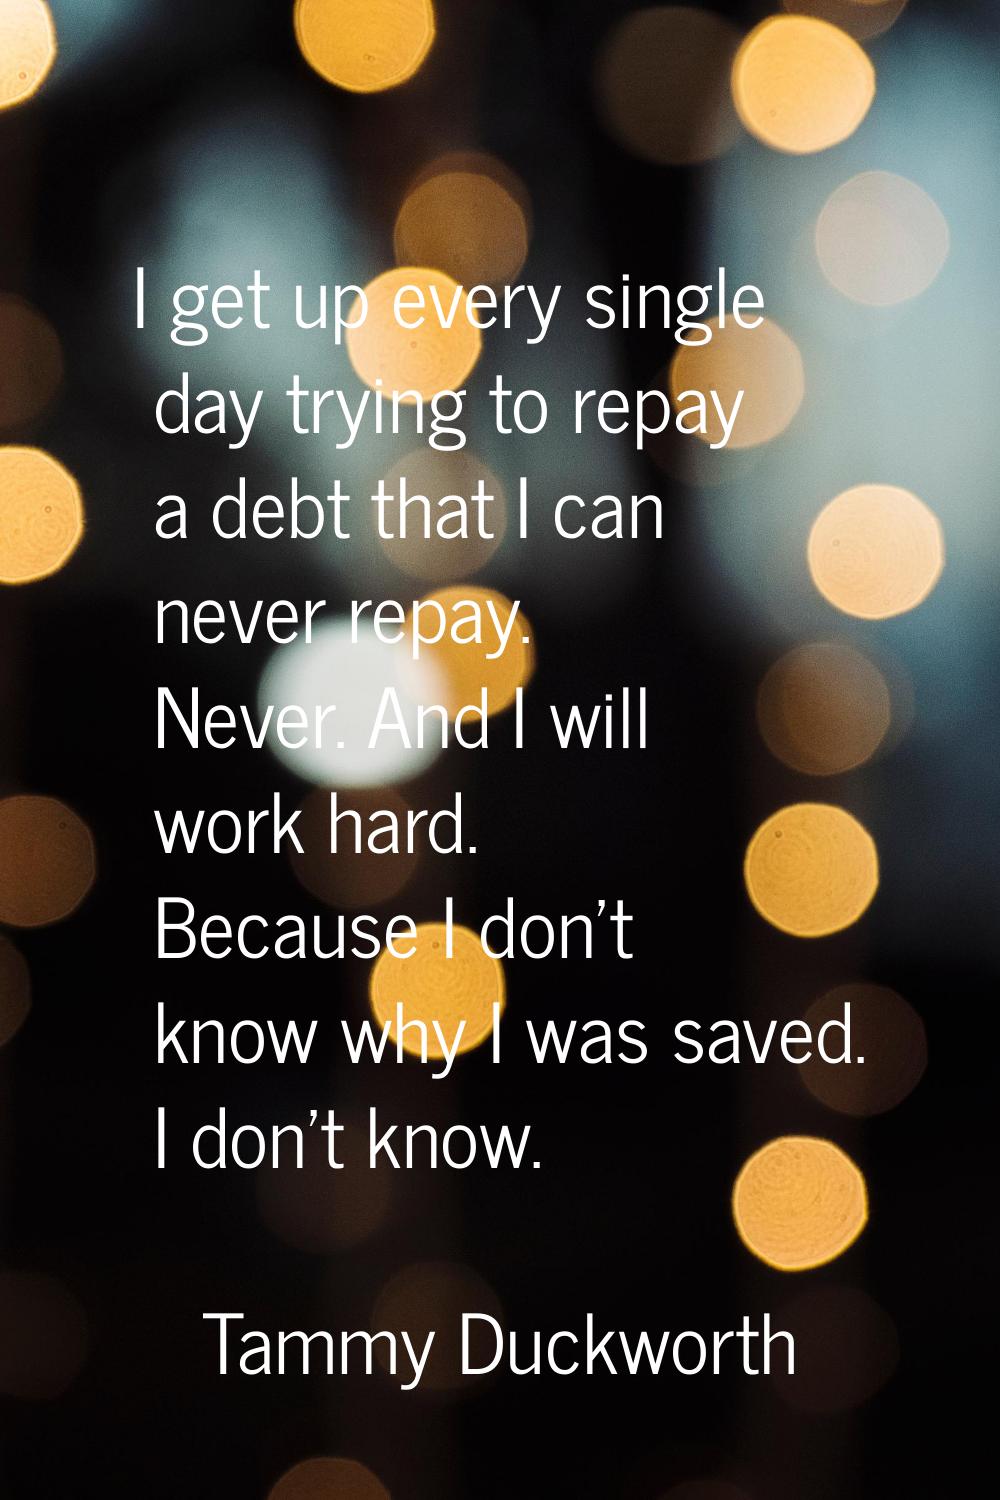 I get up every single day trying to repay a debt that I can never repay. Never. And I will work har